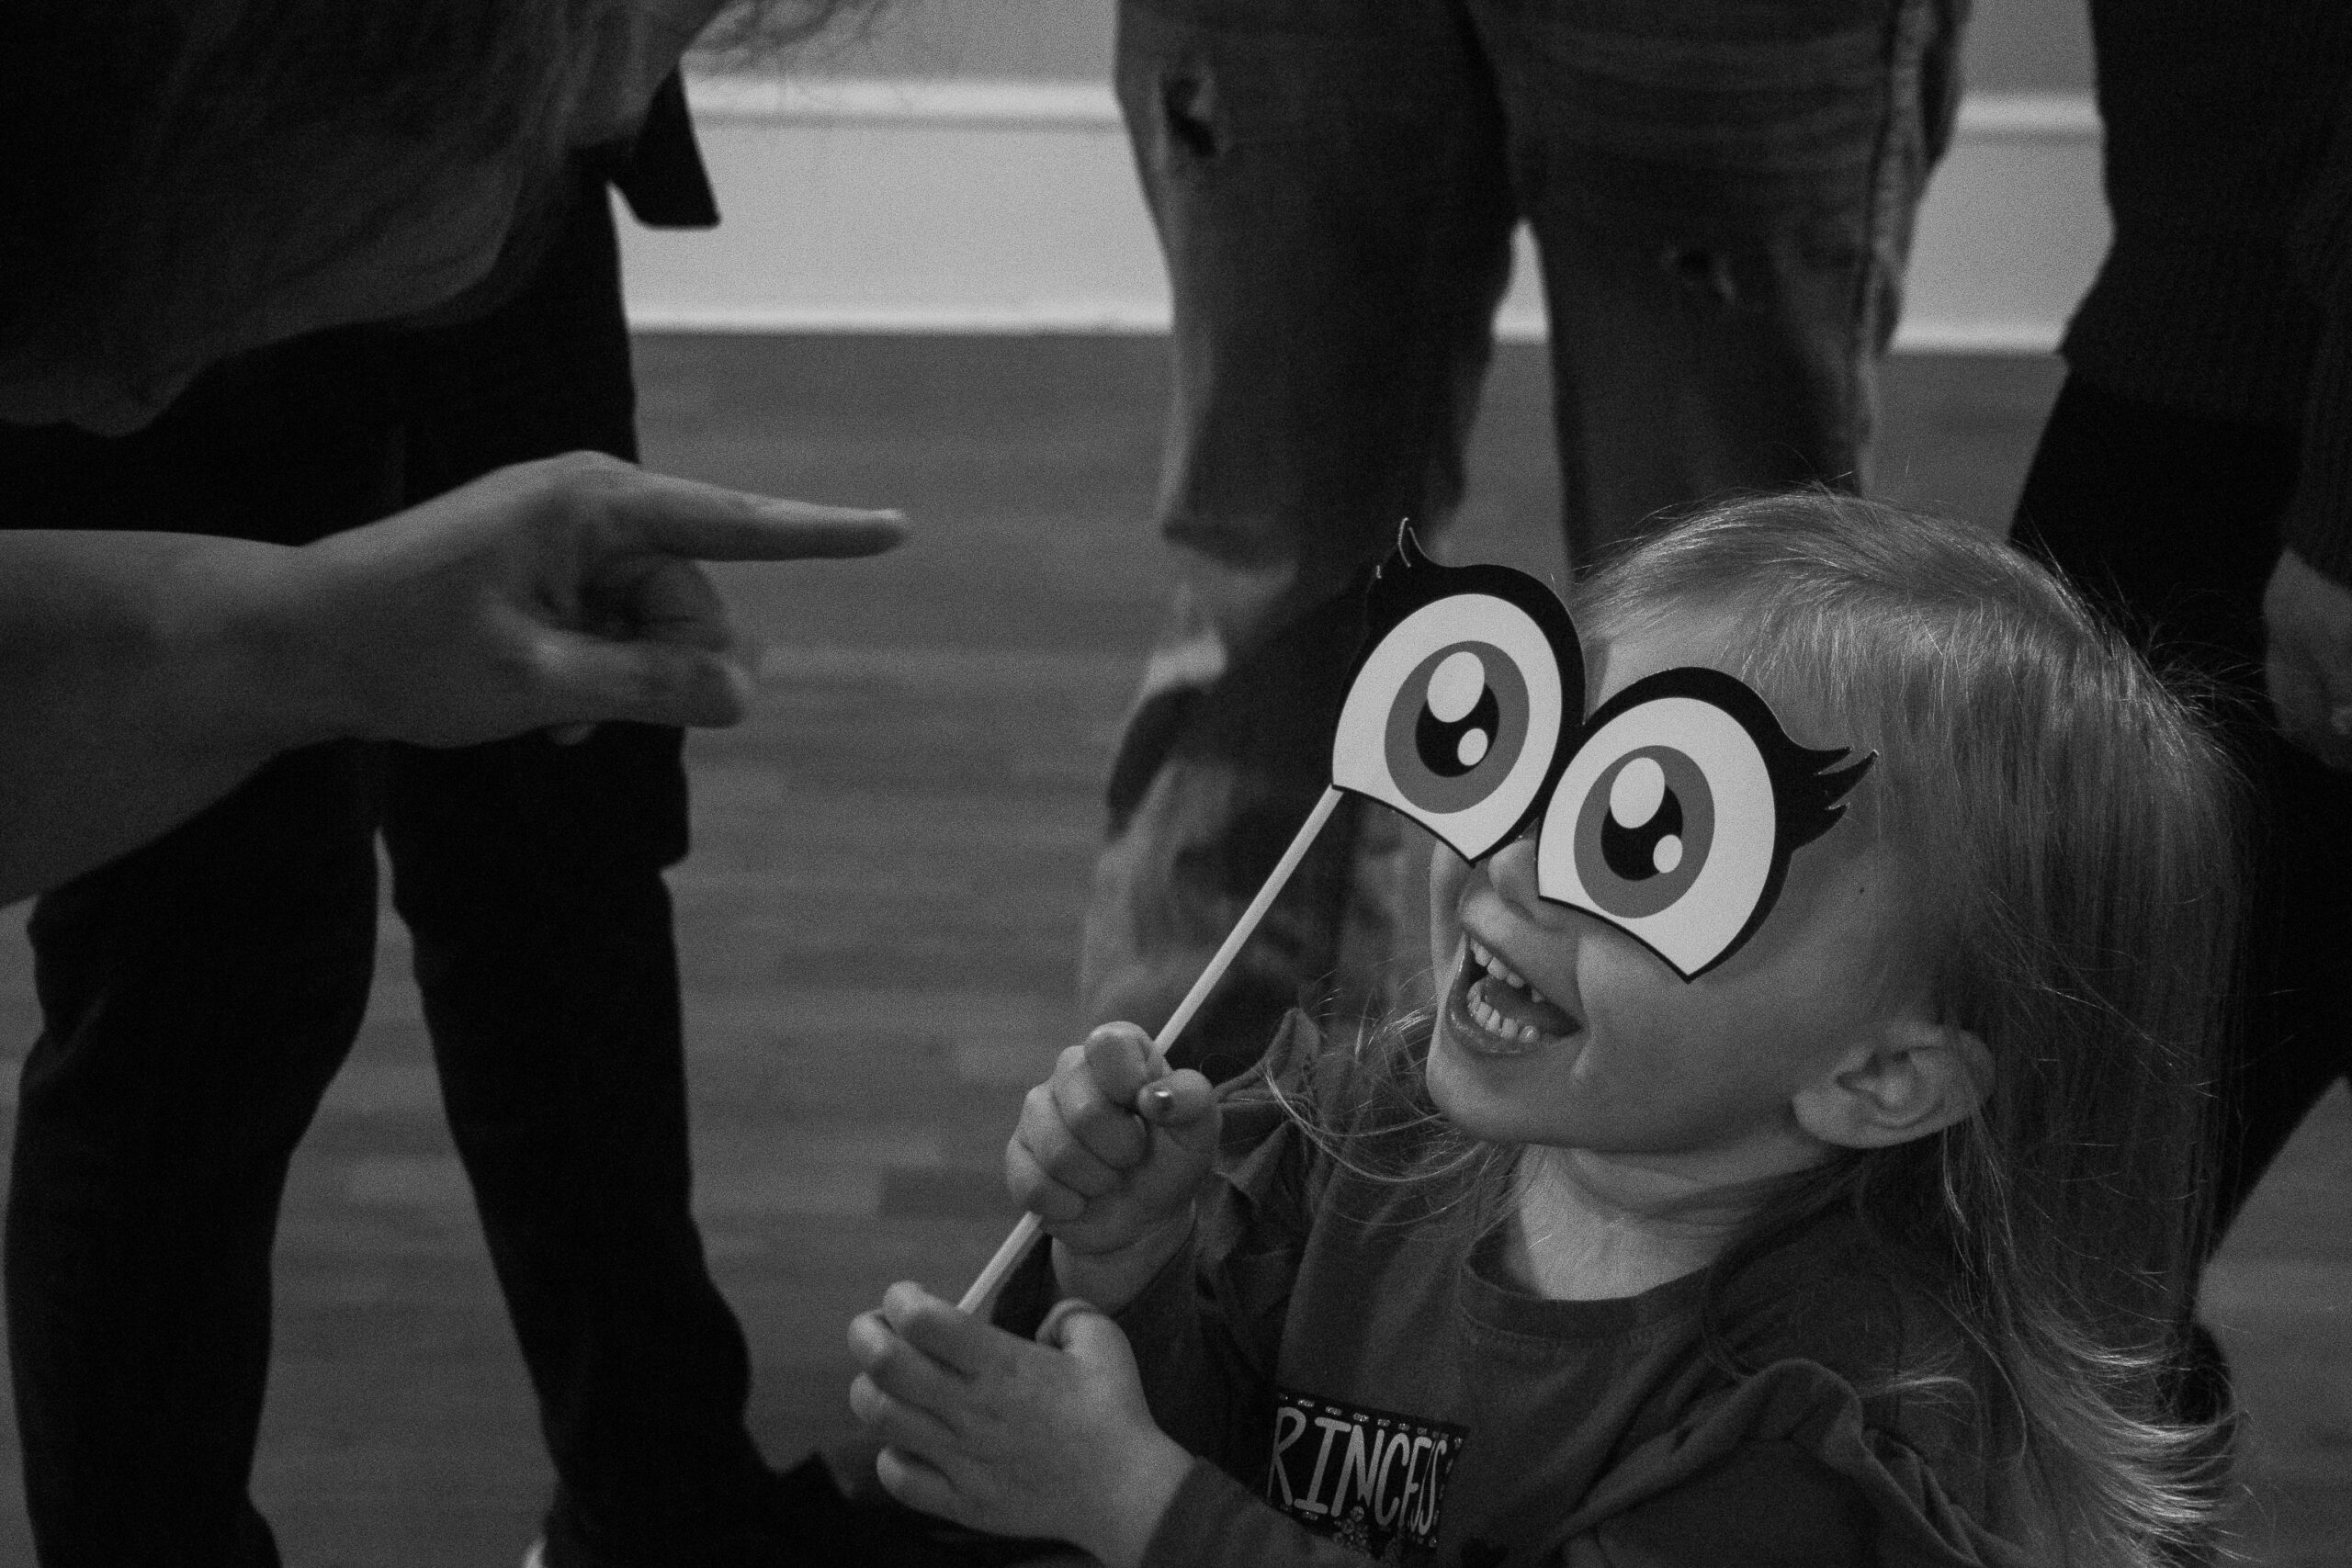 My mom points to my little cousin, who is playing with eyes meant for the photobooth at my grandma's 70th surprise party.